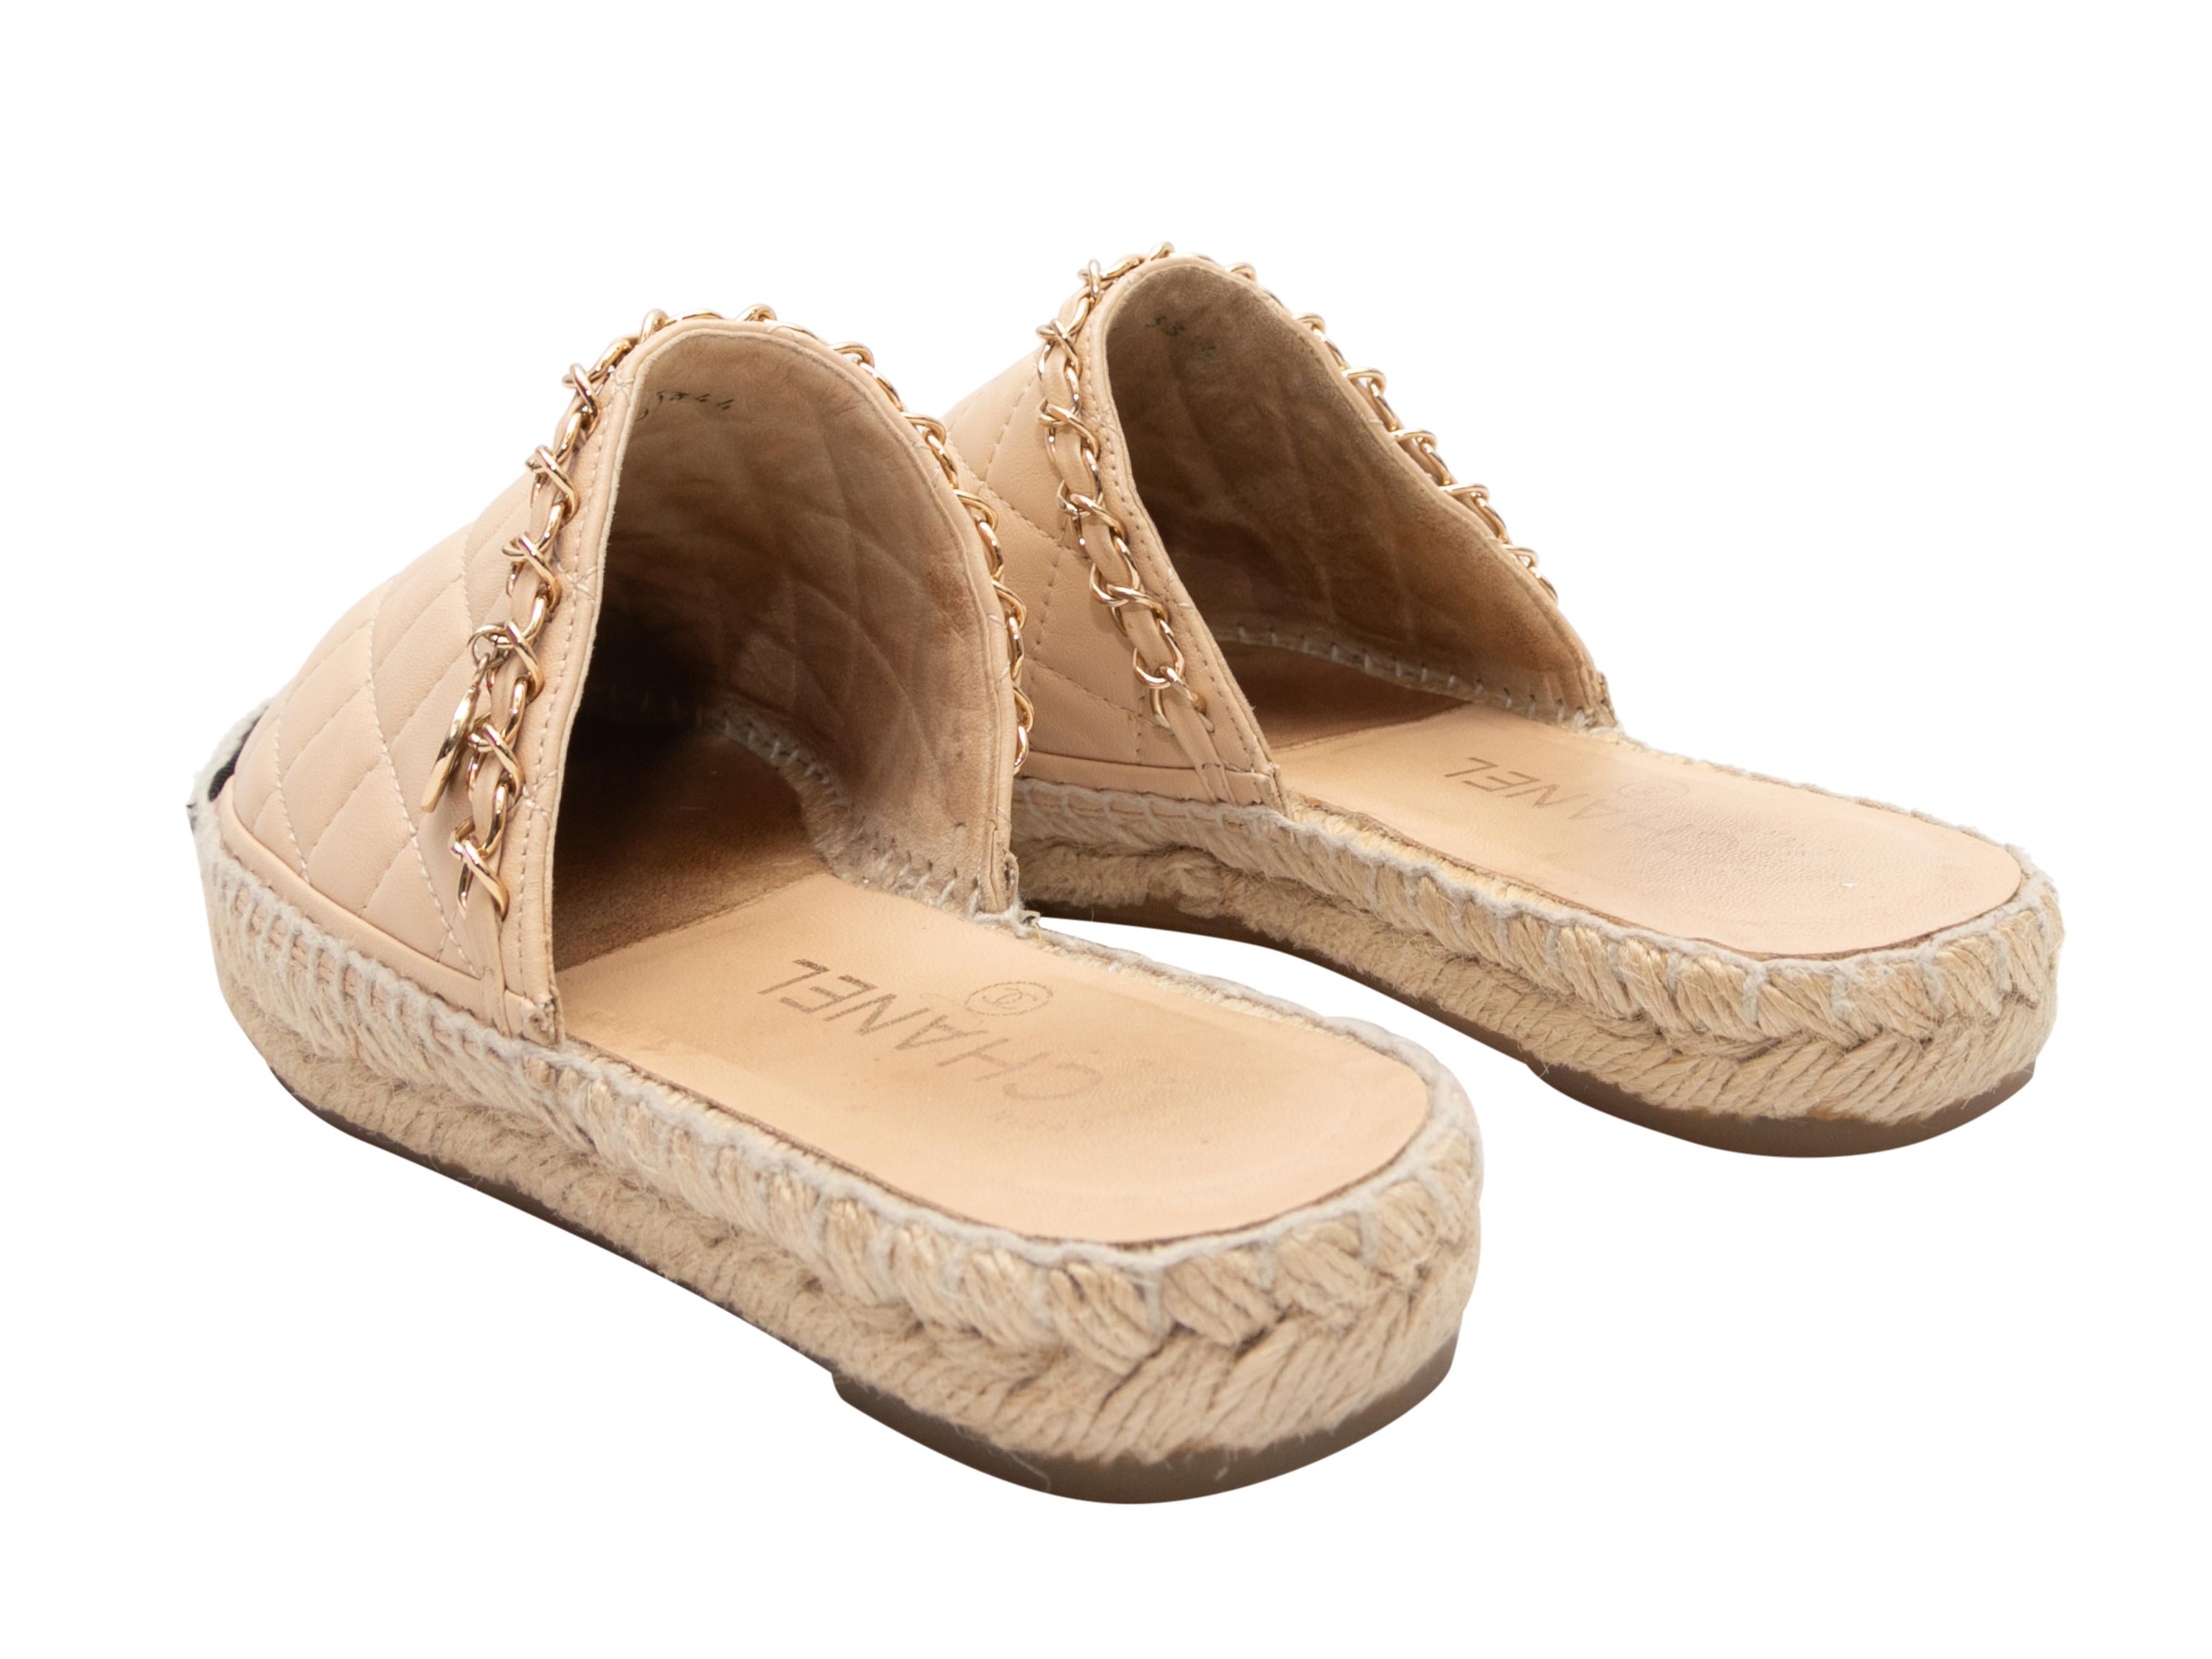 Women's Tan & Black Chanel Cap-Toe Quilted Espadrille Mules Size 36